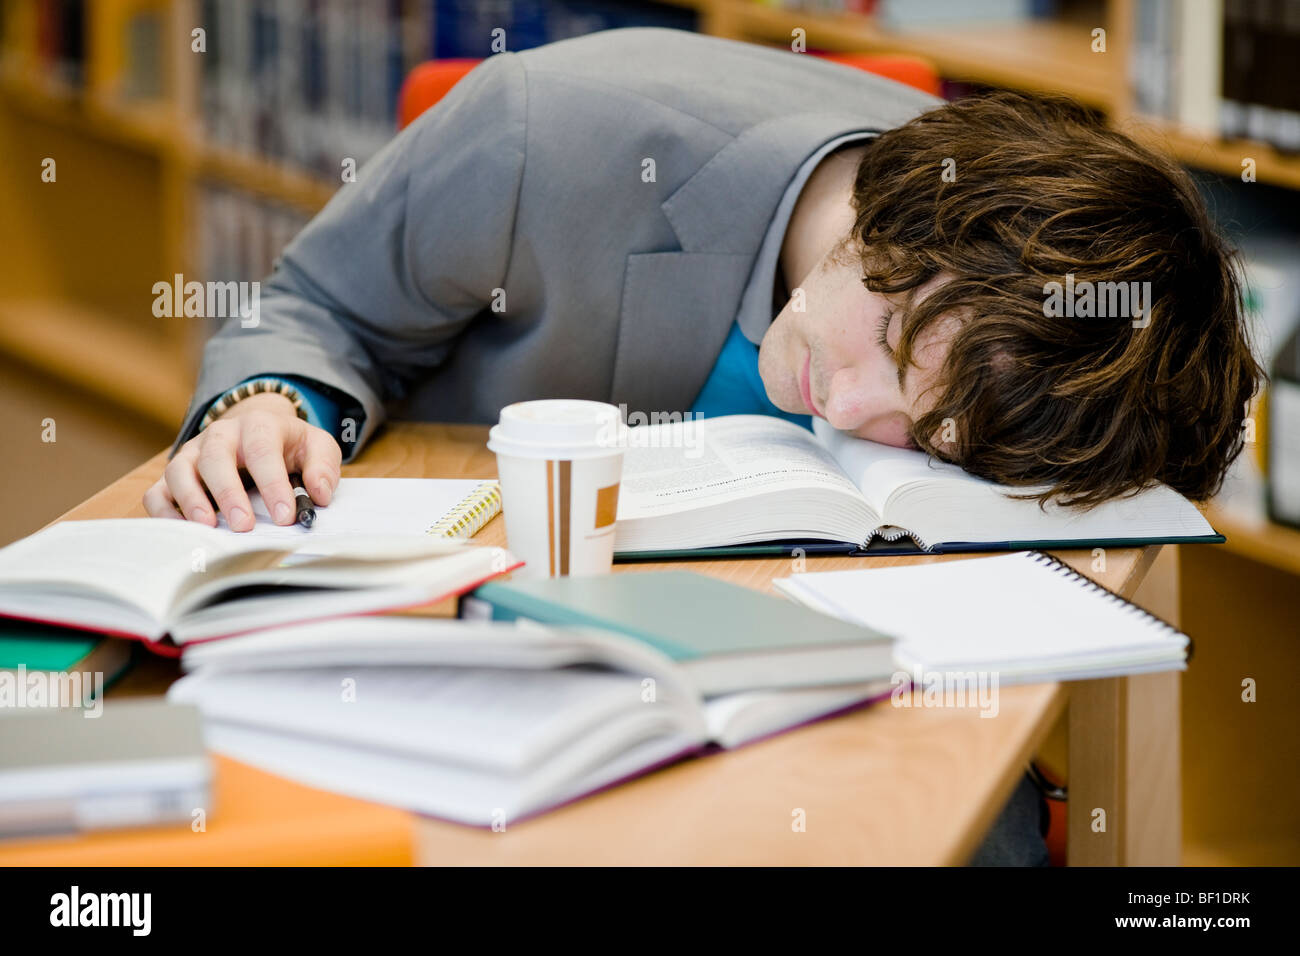 A student who has fallen asleep in a library, Sweden. Stock Photo